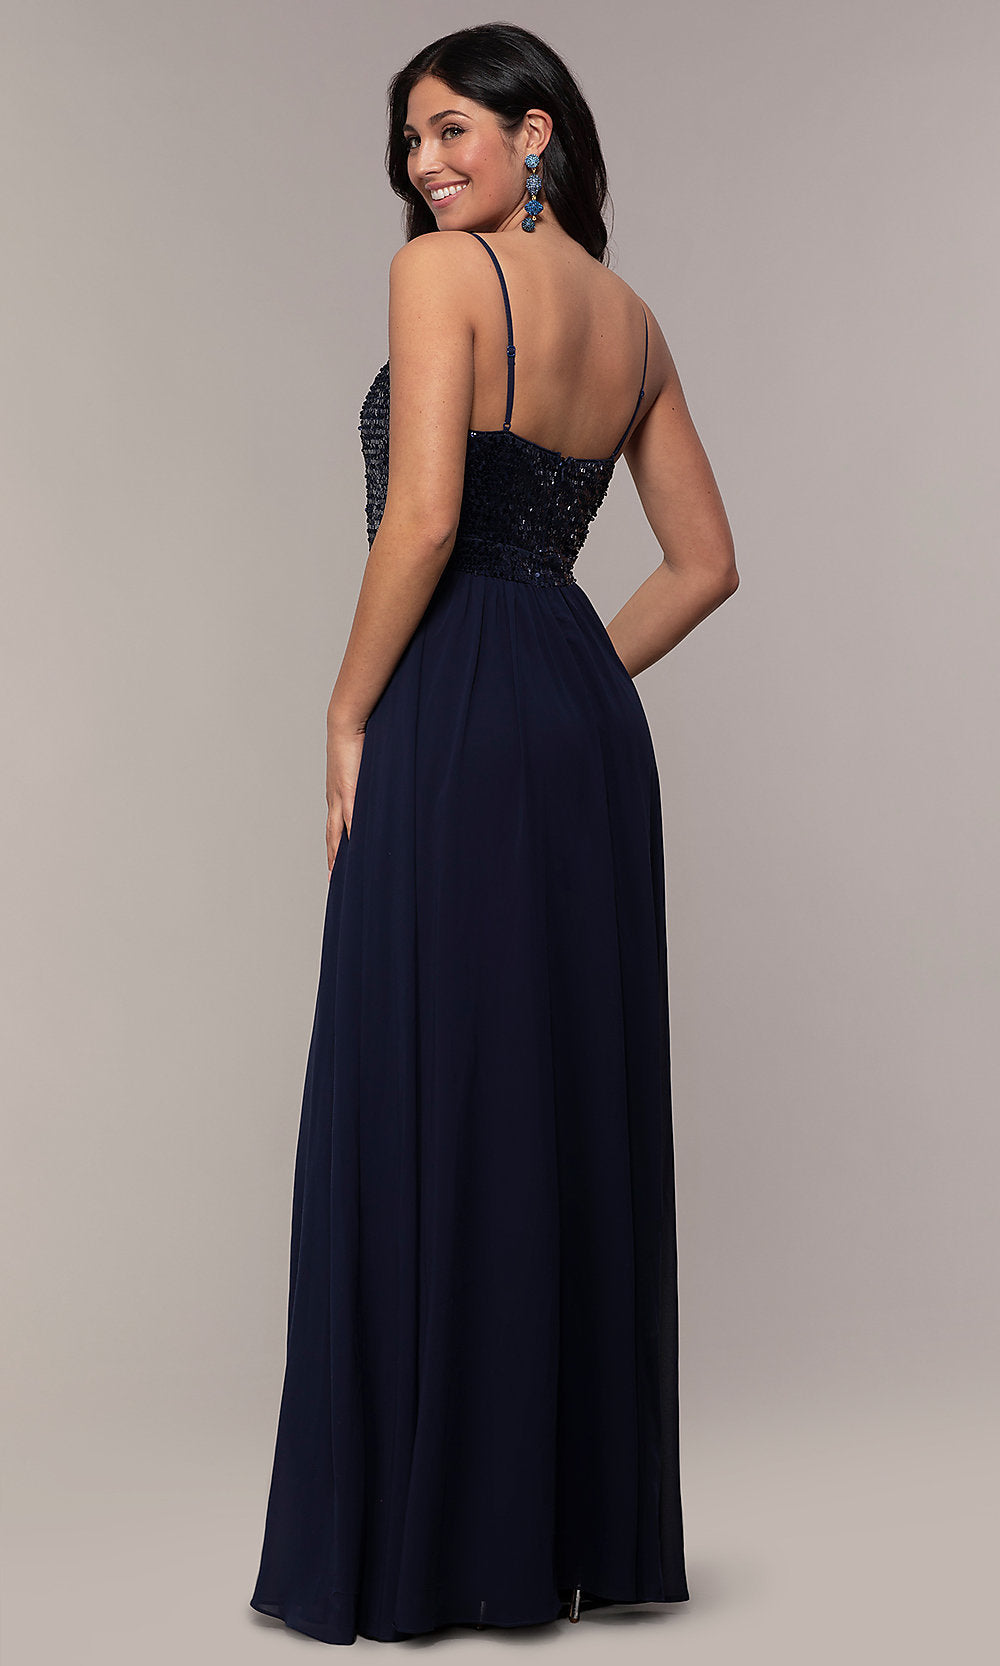  Long Chiffon Prom Dress with Sequin V-Neck Bodice